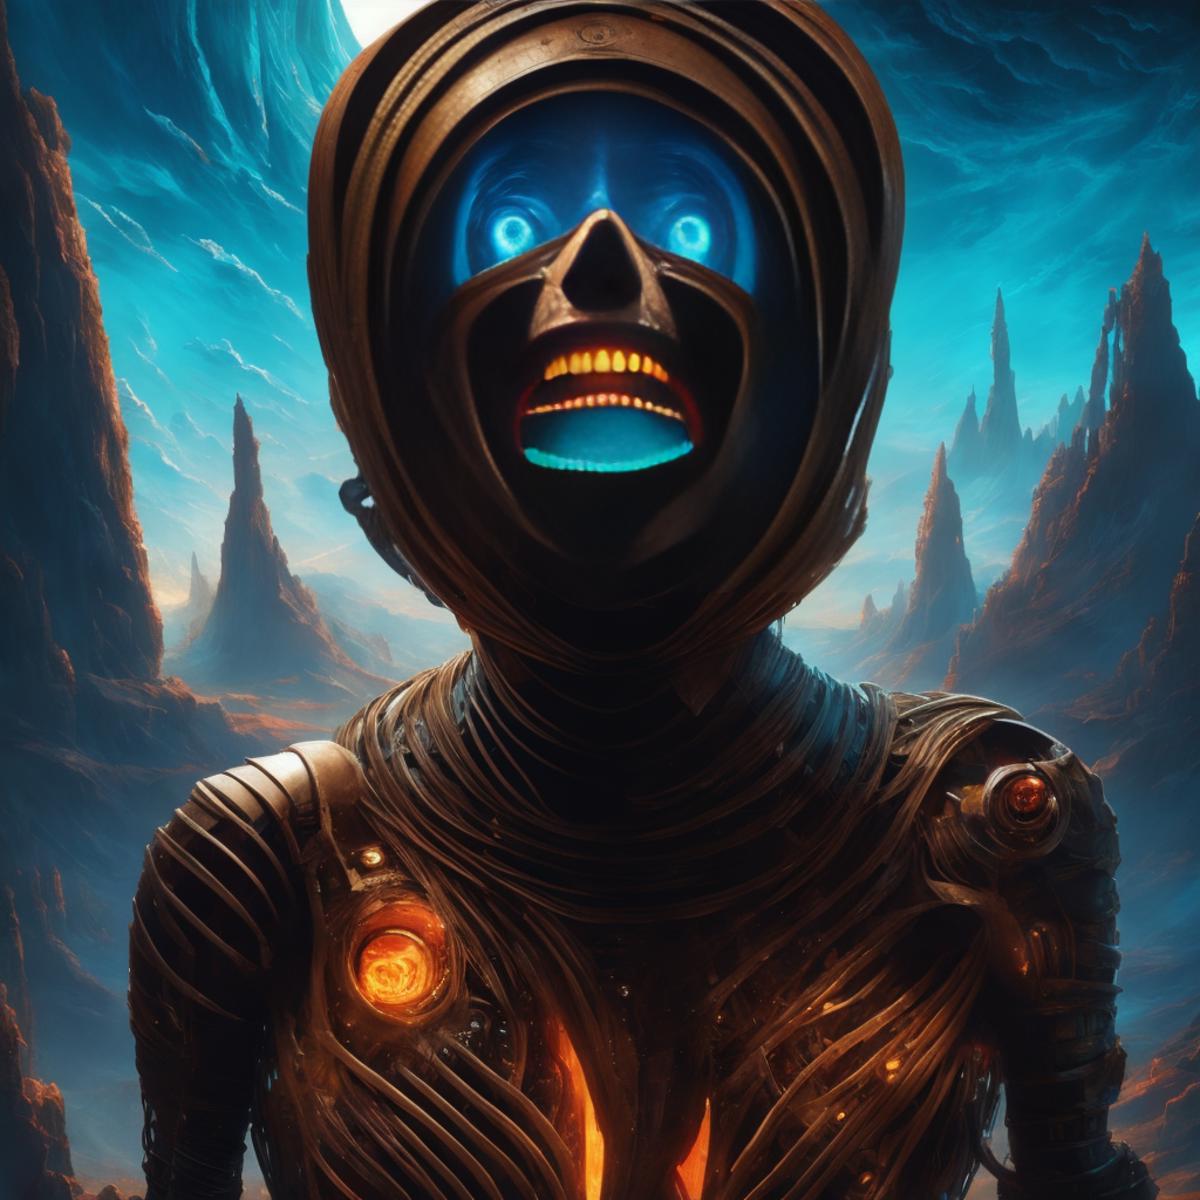 A robot with blue eyes and a screaming mouth is featured in a dark, futuristic setting.